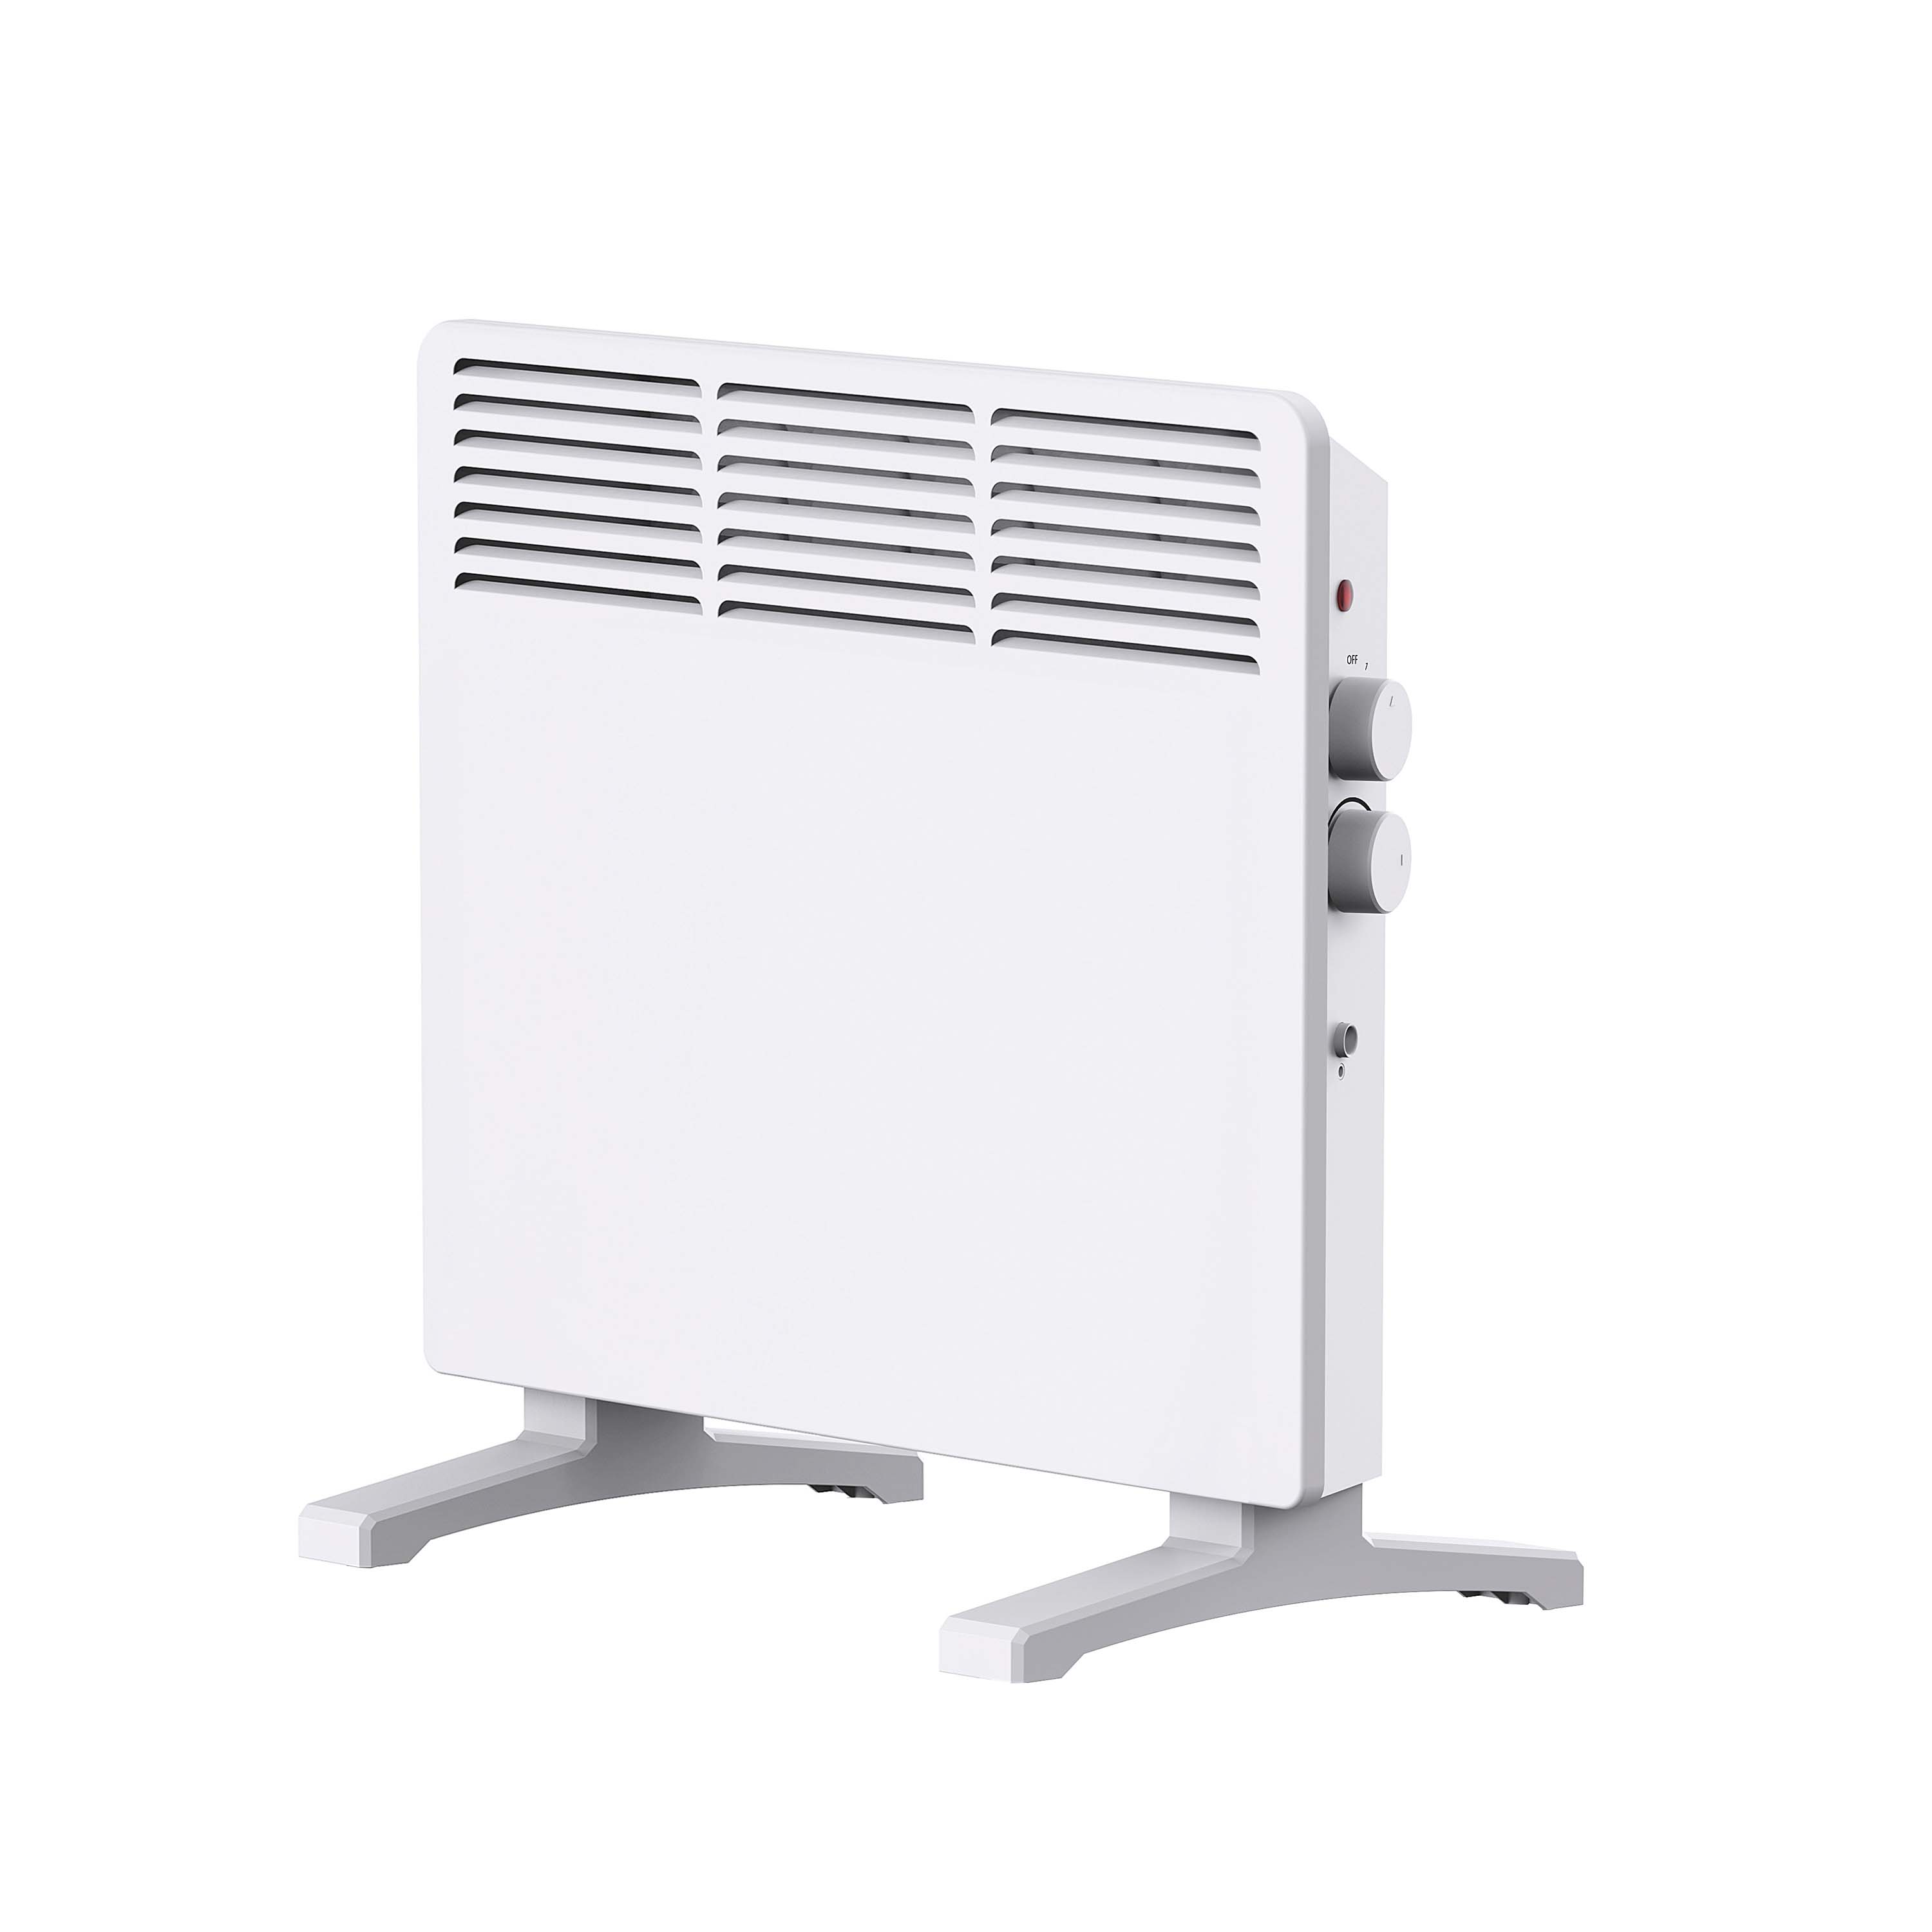 Adjustable thermostat and overheat protection Heater